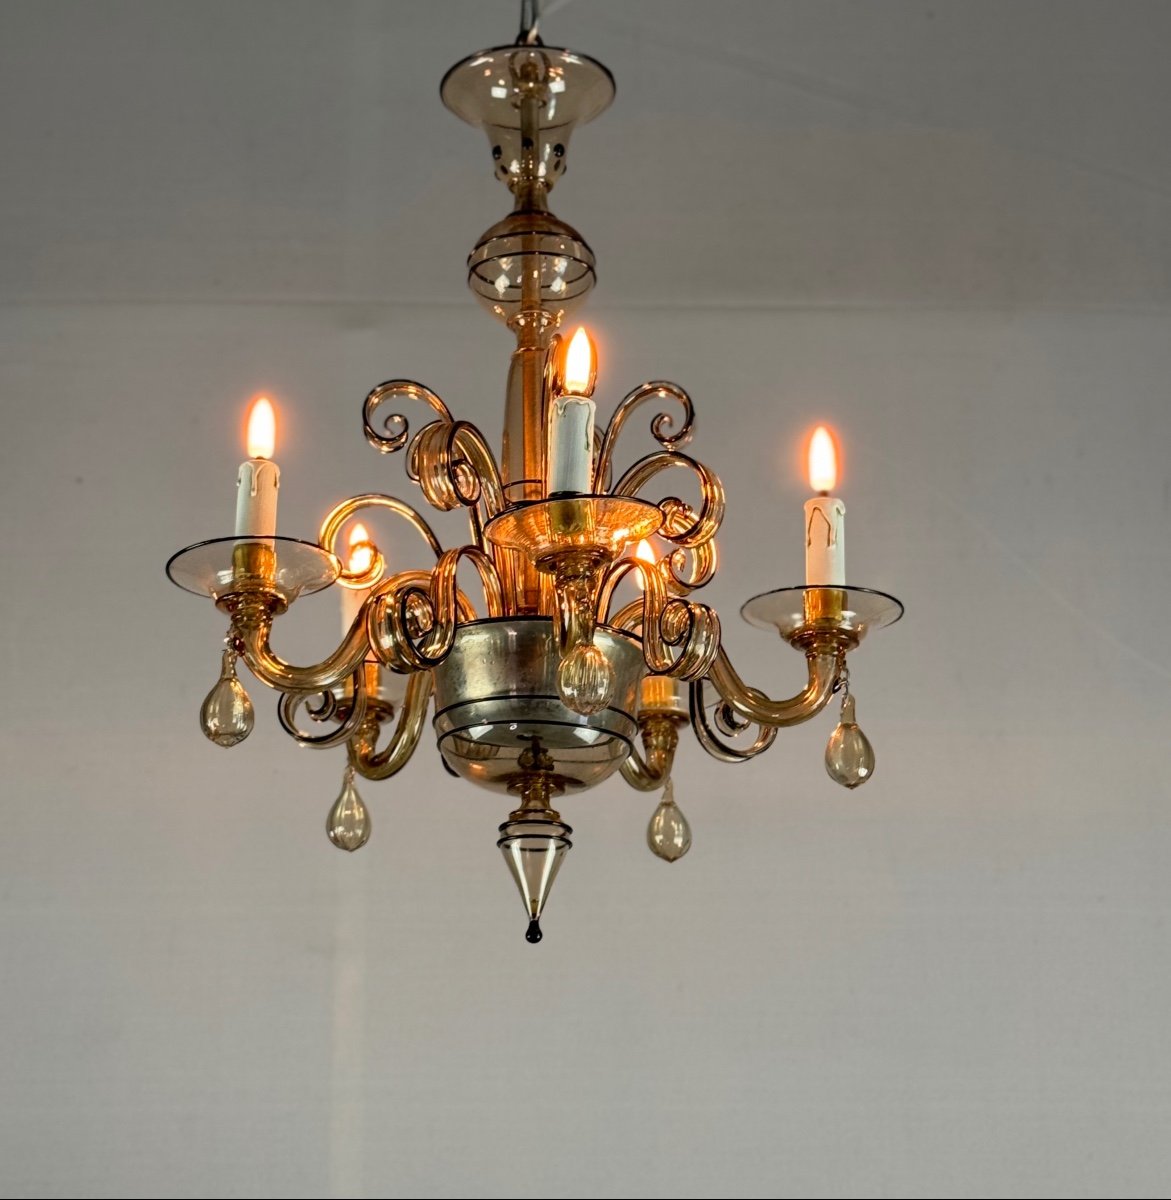 Venetian Chandelier In Mordore Murano Glass Highlighted With Black Lining, Circa 1950